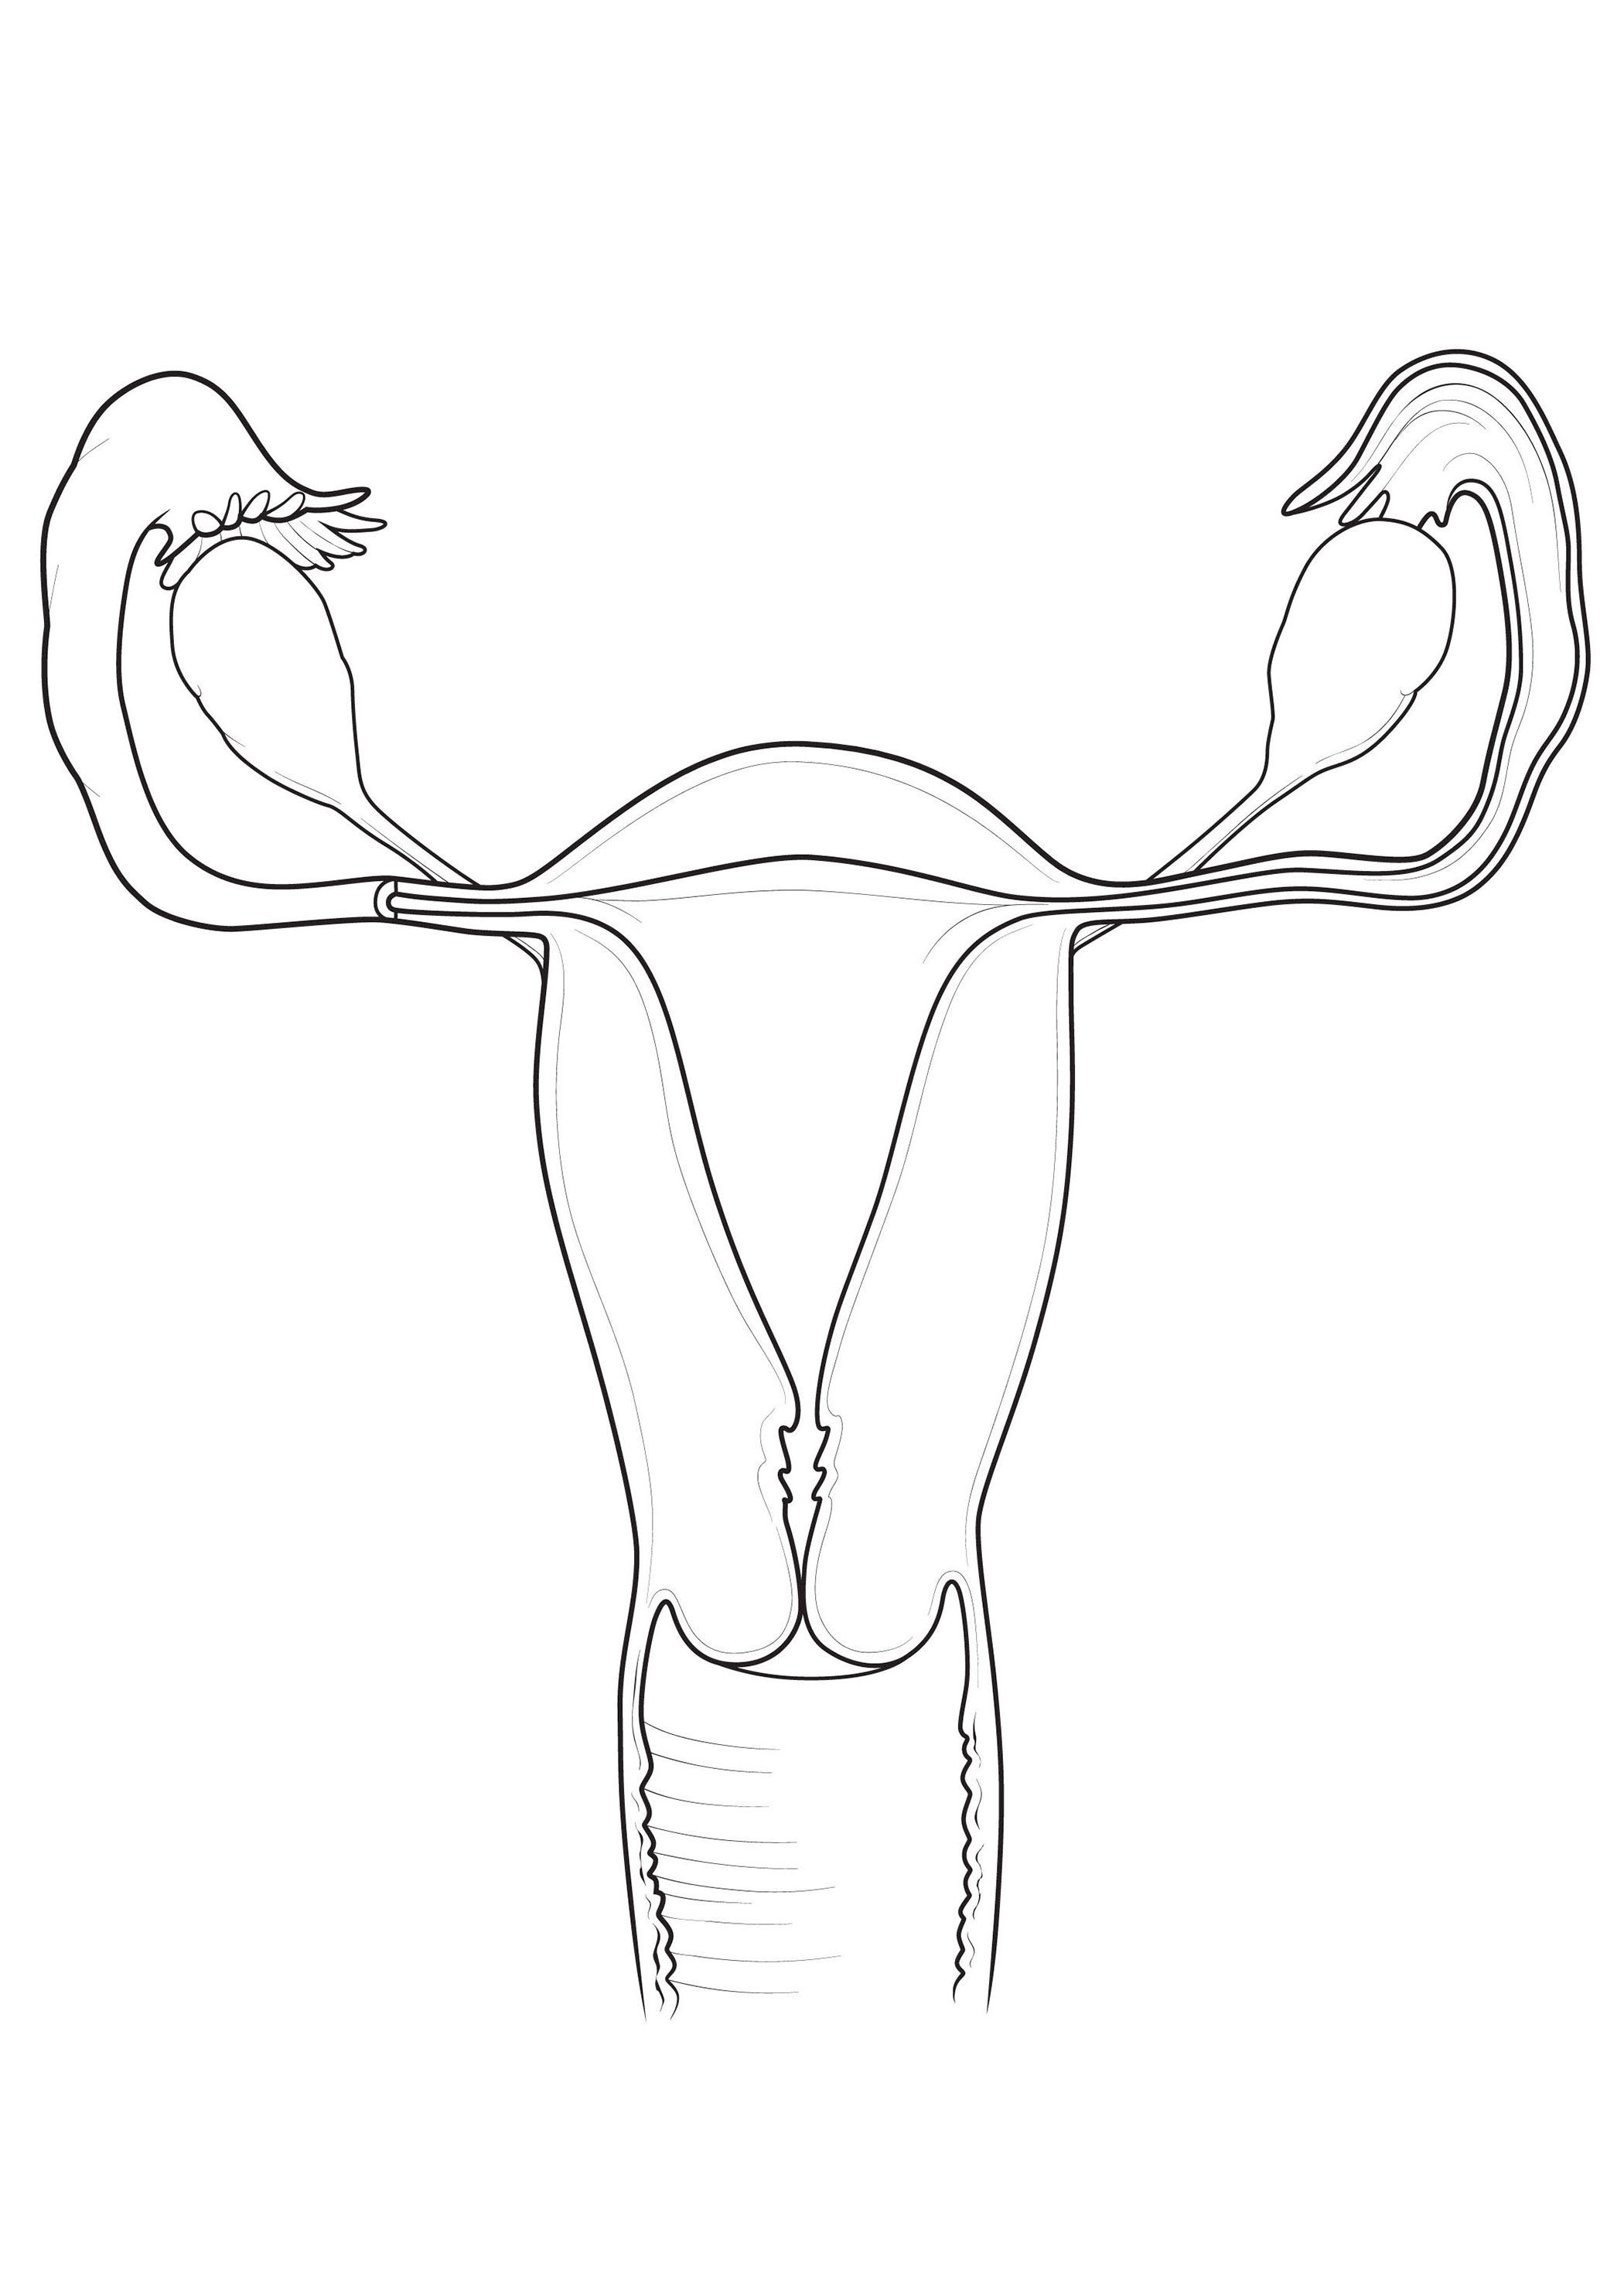 How To Draw Female Reproductive System Easily The Structure Of Female ...